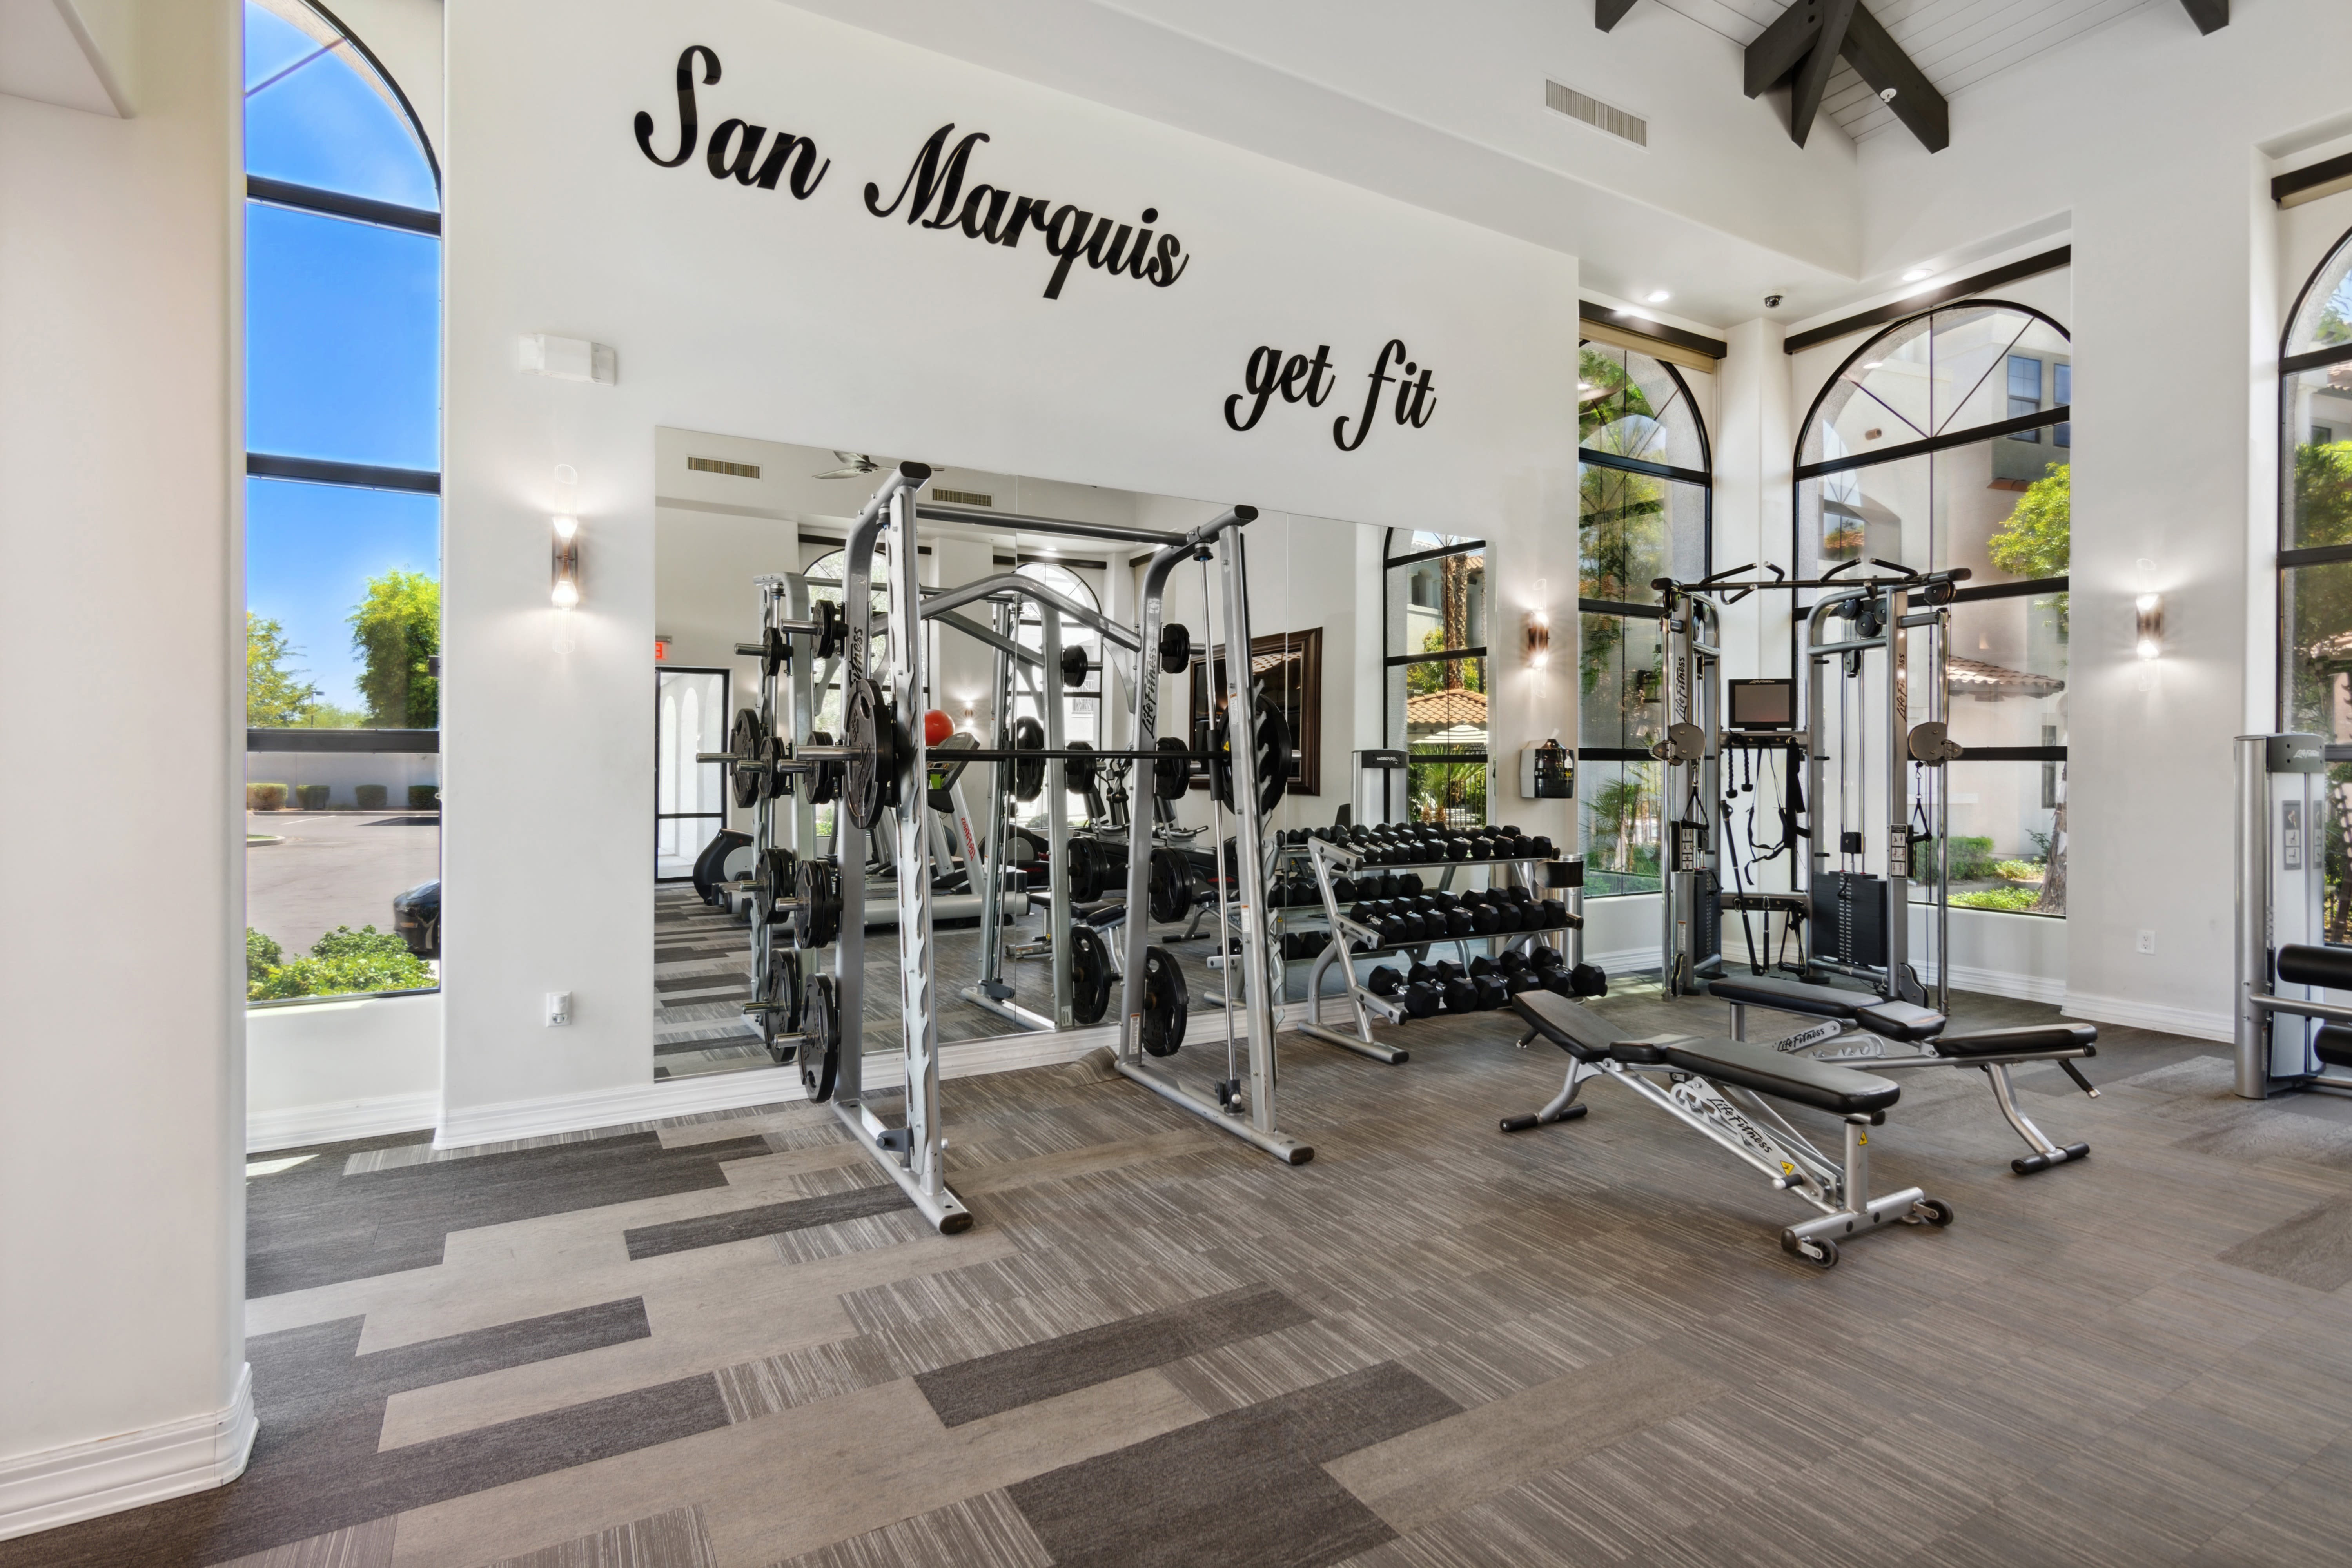 Fitness center with free weights at San Marquis in Tempe, Arizona